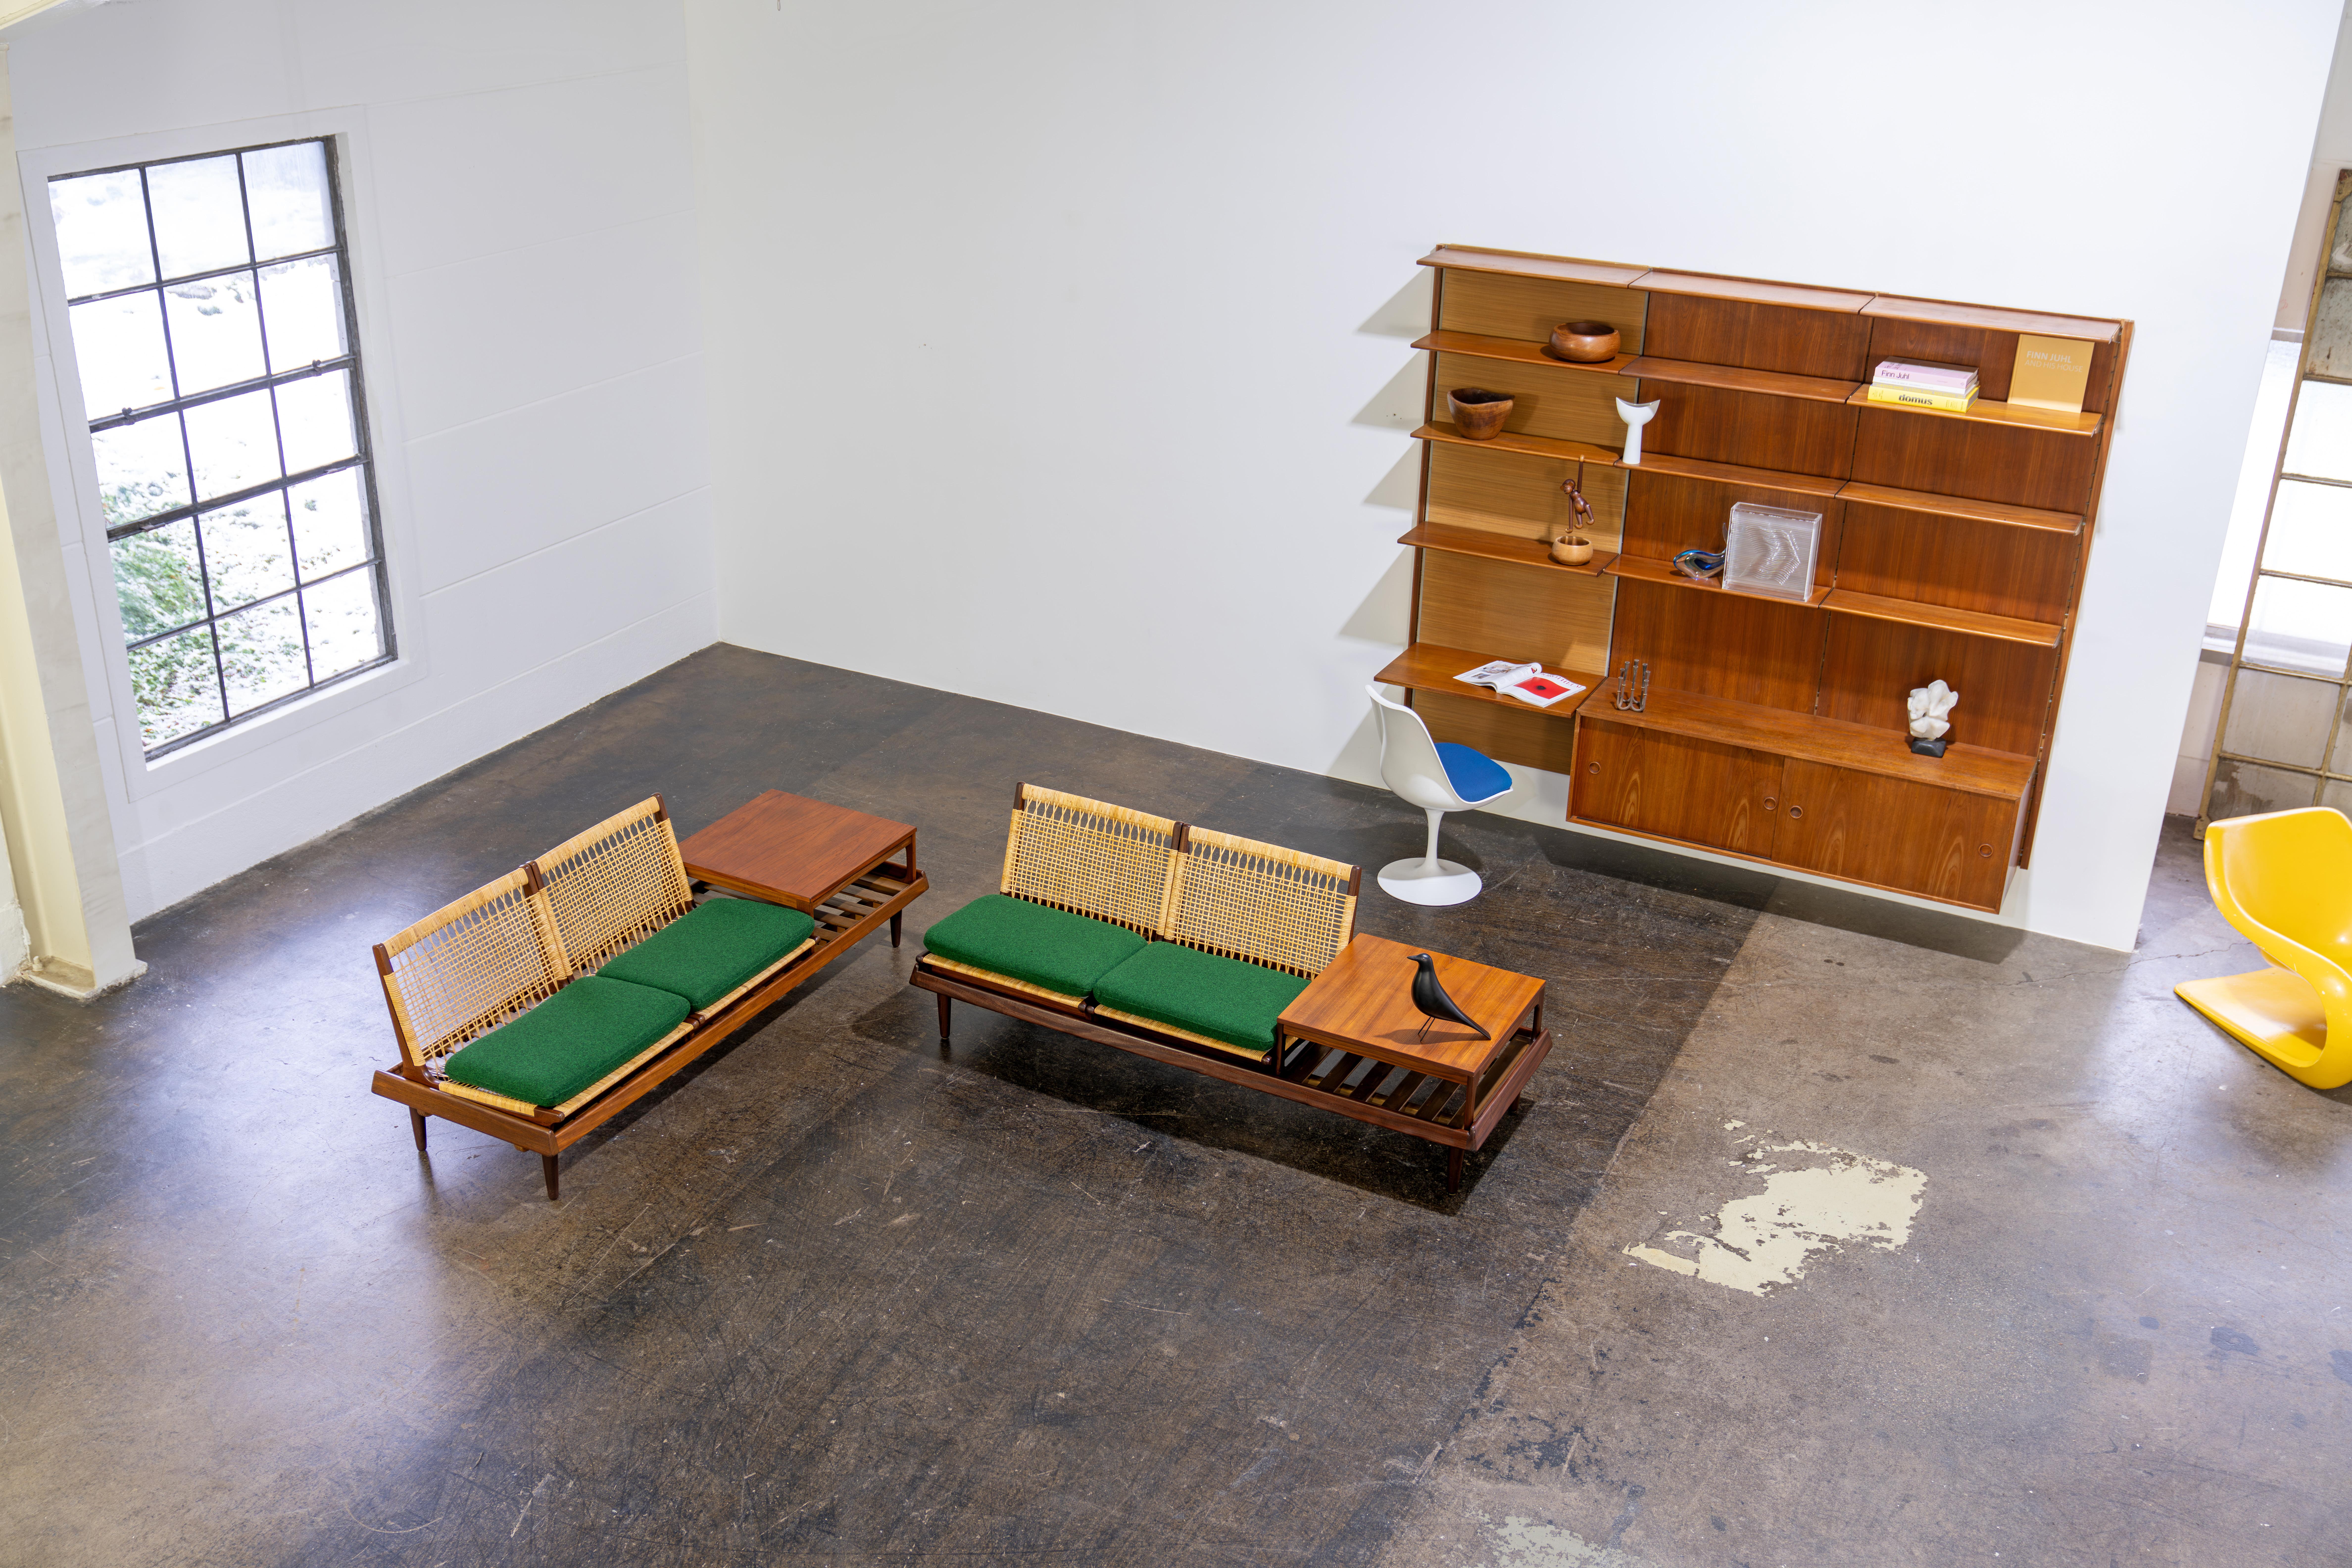 Pair of modular teak TV benches model 161 by Hans Olsen for Bramin, Denmark, ade in the 1960s. The set consists of two benches, four seating modules and two tables. Aside from beautifull rattan caning, the seats come with two cushions per seat, one